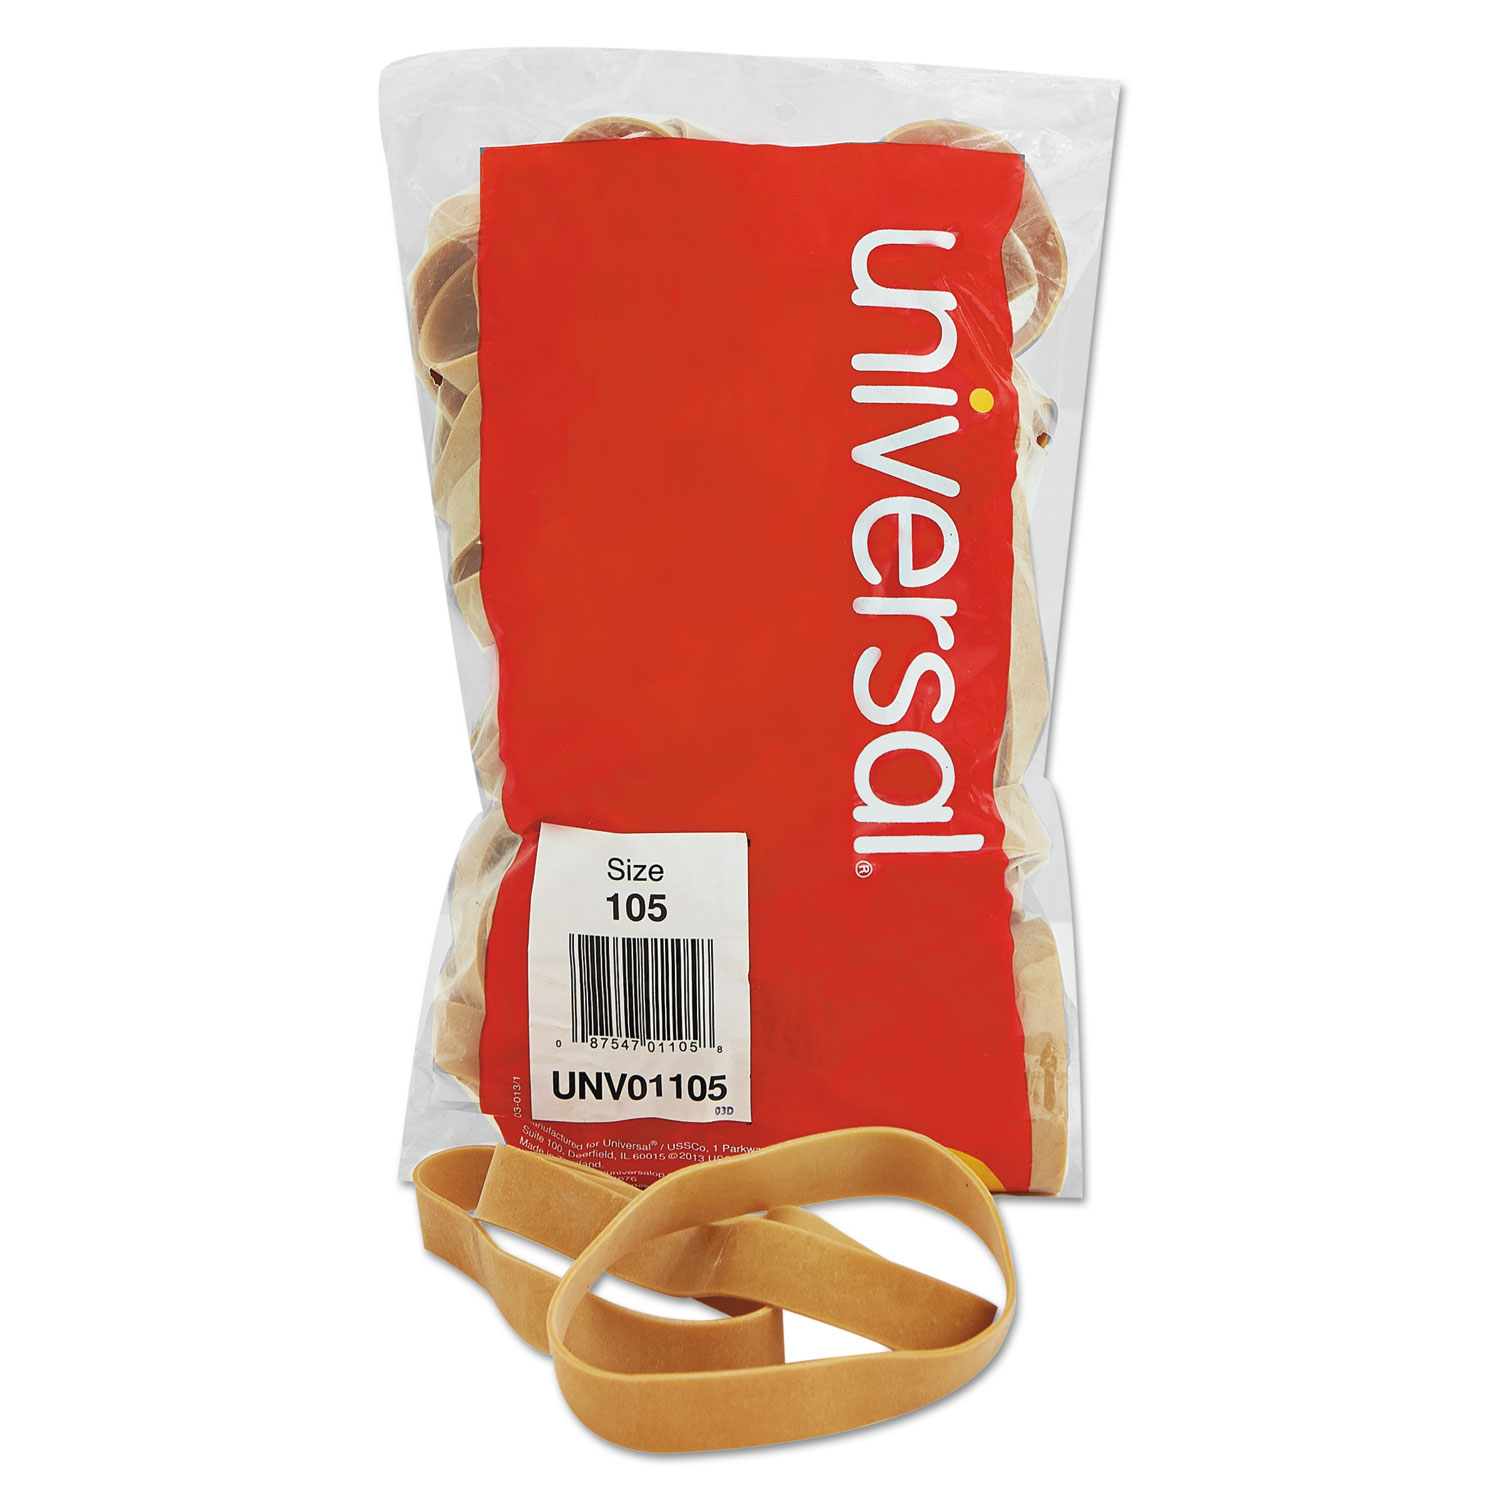 Rubber Bands, Size 105, 5 x 5/8, 55 Bands/1lb Pack